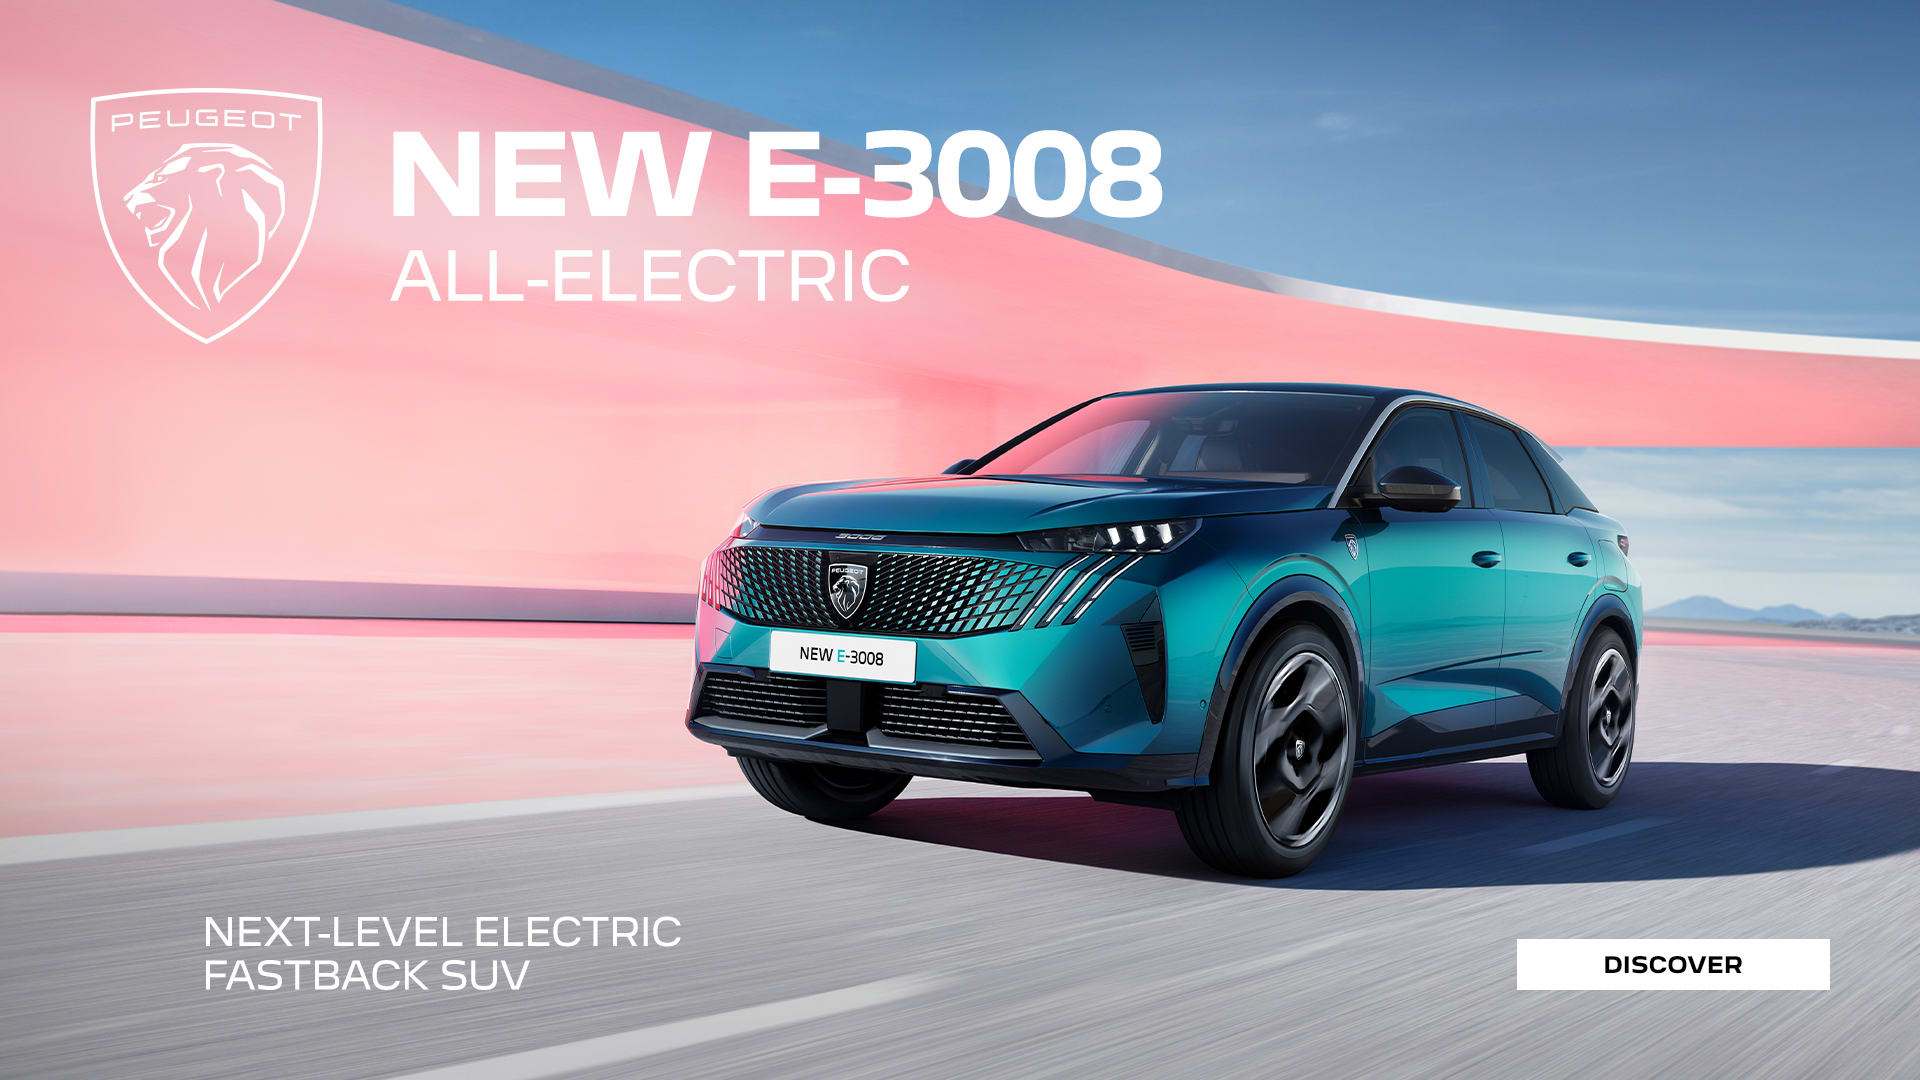 NEXT-LEVEL  ELECTRIC FASTBACK SUV